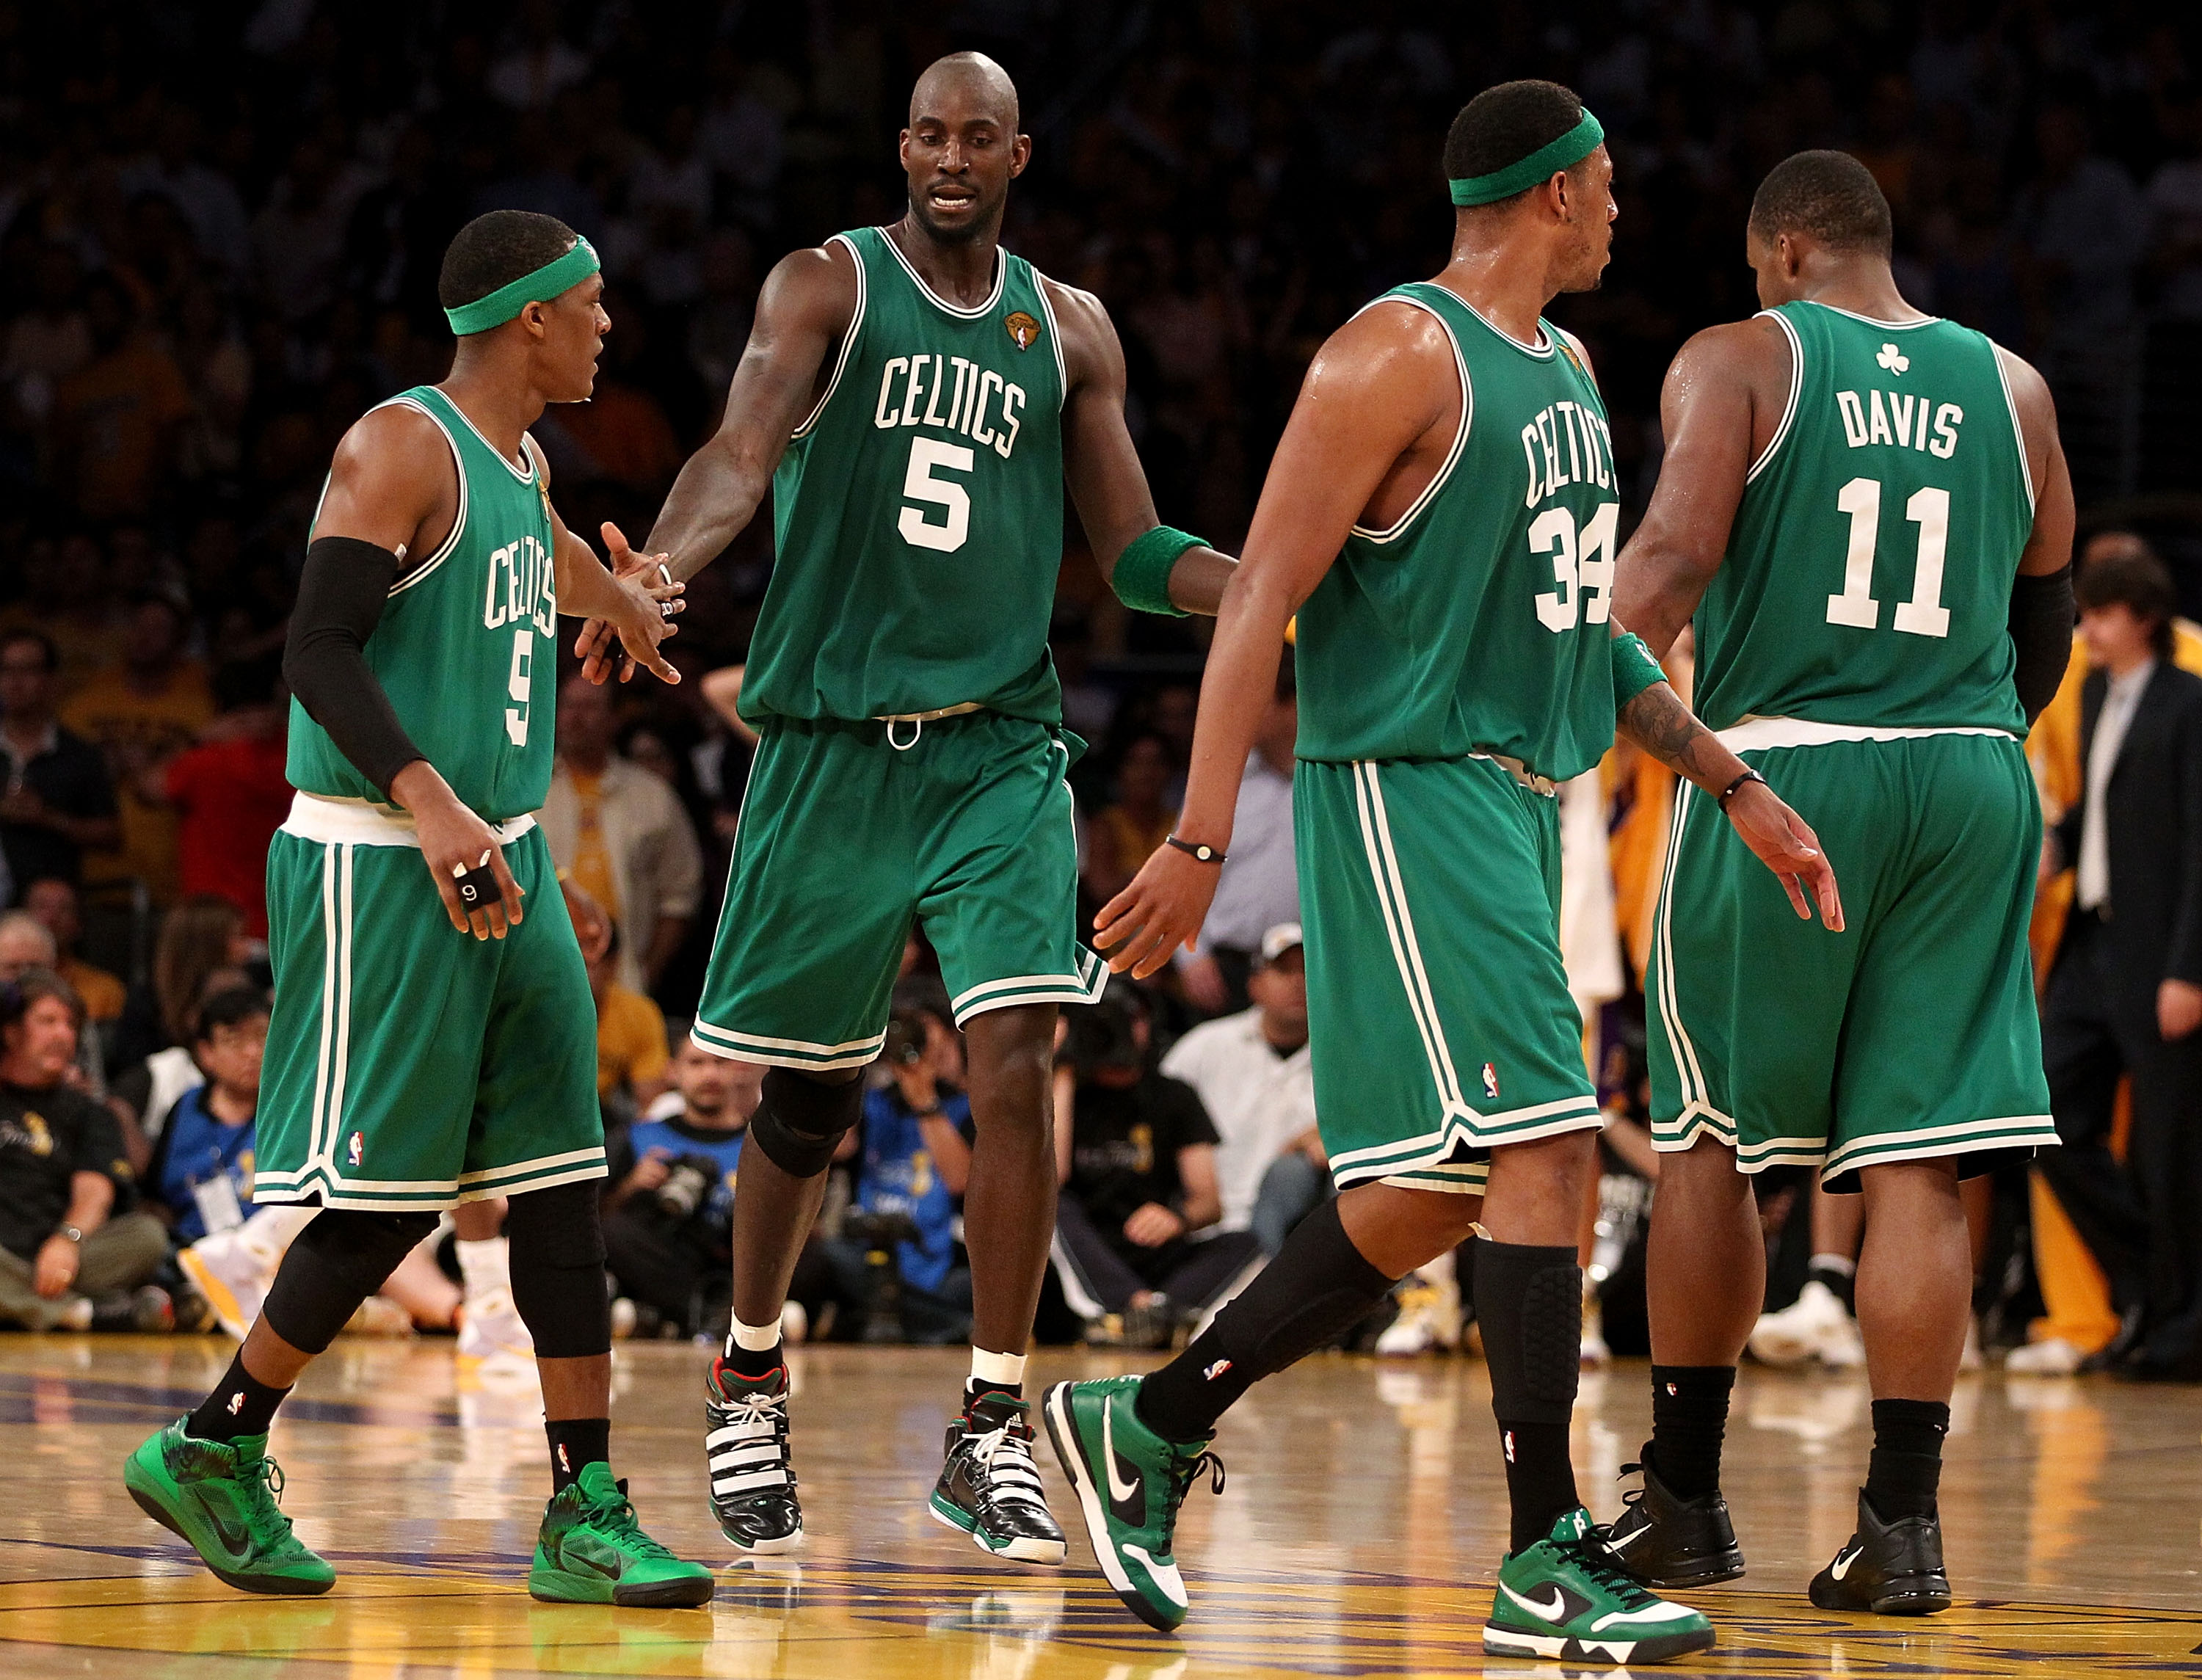 LOS ANGELES, CA - JUNE 17:  (L-R) Rajon Rondo #9, Kevin Garnett #5, Paul Pierce #34 and Glen Davis #11 of the Boston Celtics walk across the court in the second half against the Los Angeles Lakers in Game Seven of the 2010 NBA Finals at Staples Center on 